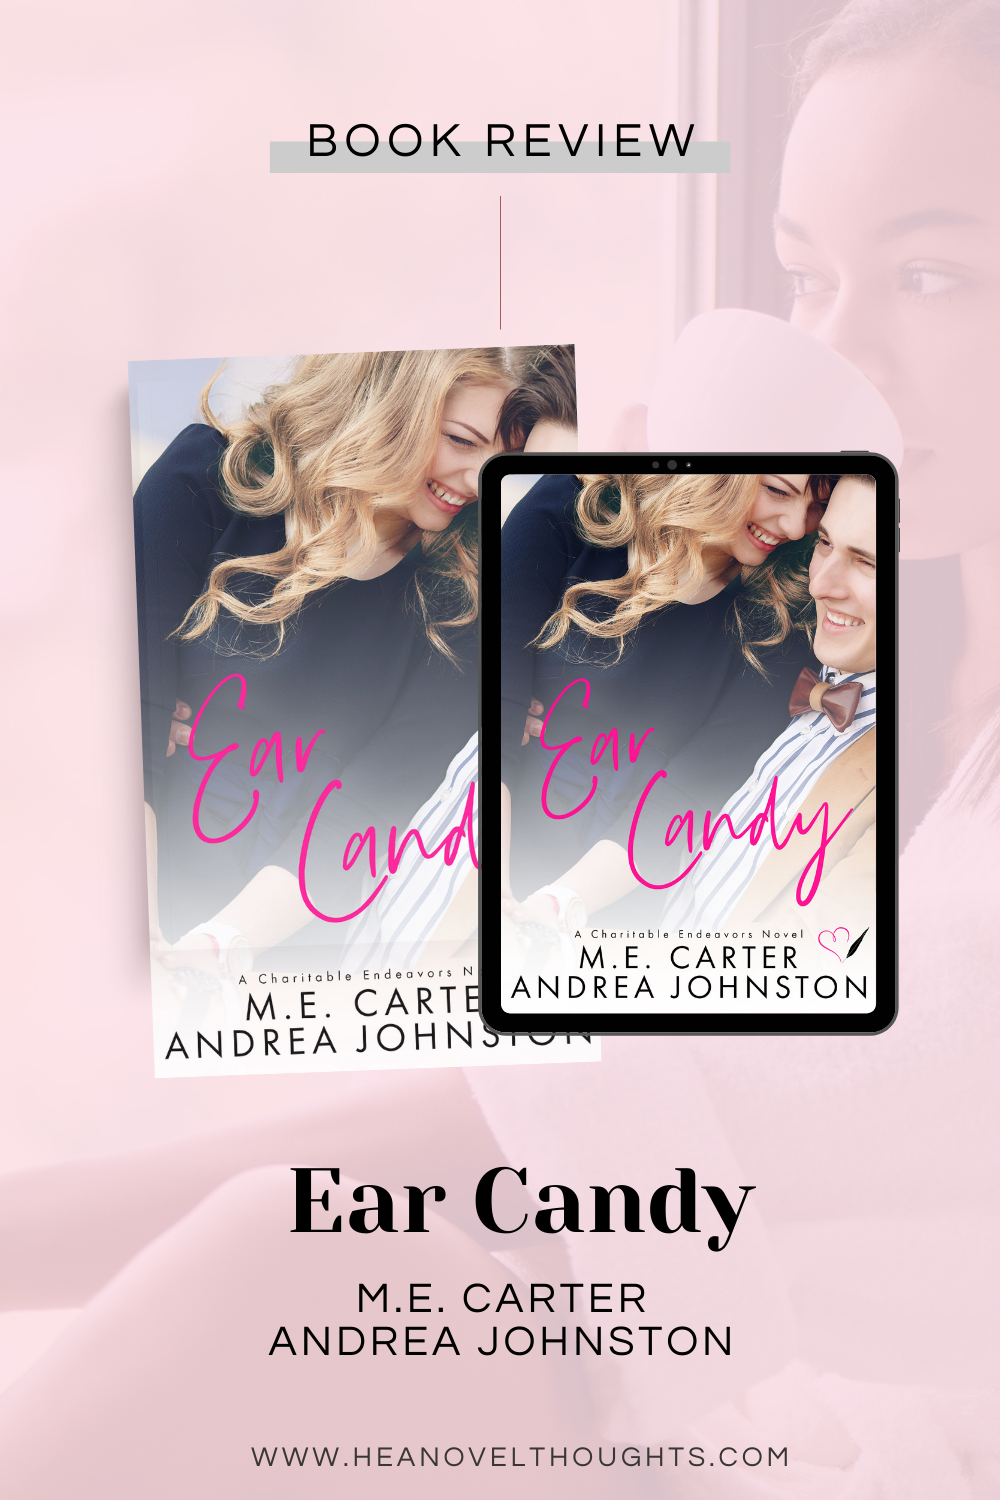 Ear Candy by M.E. Carter and Andrea Johnston